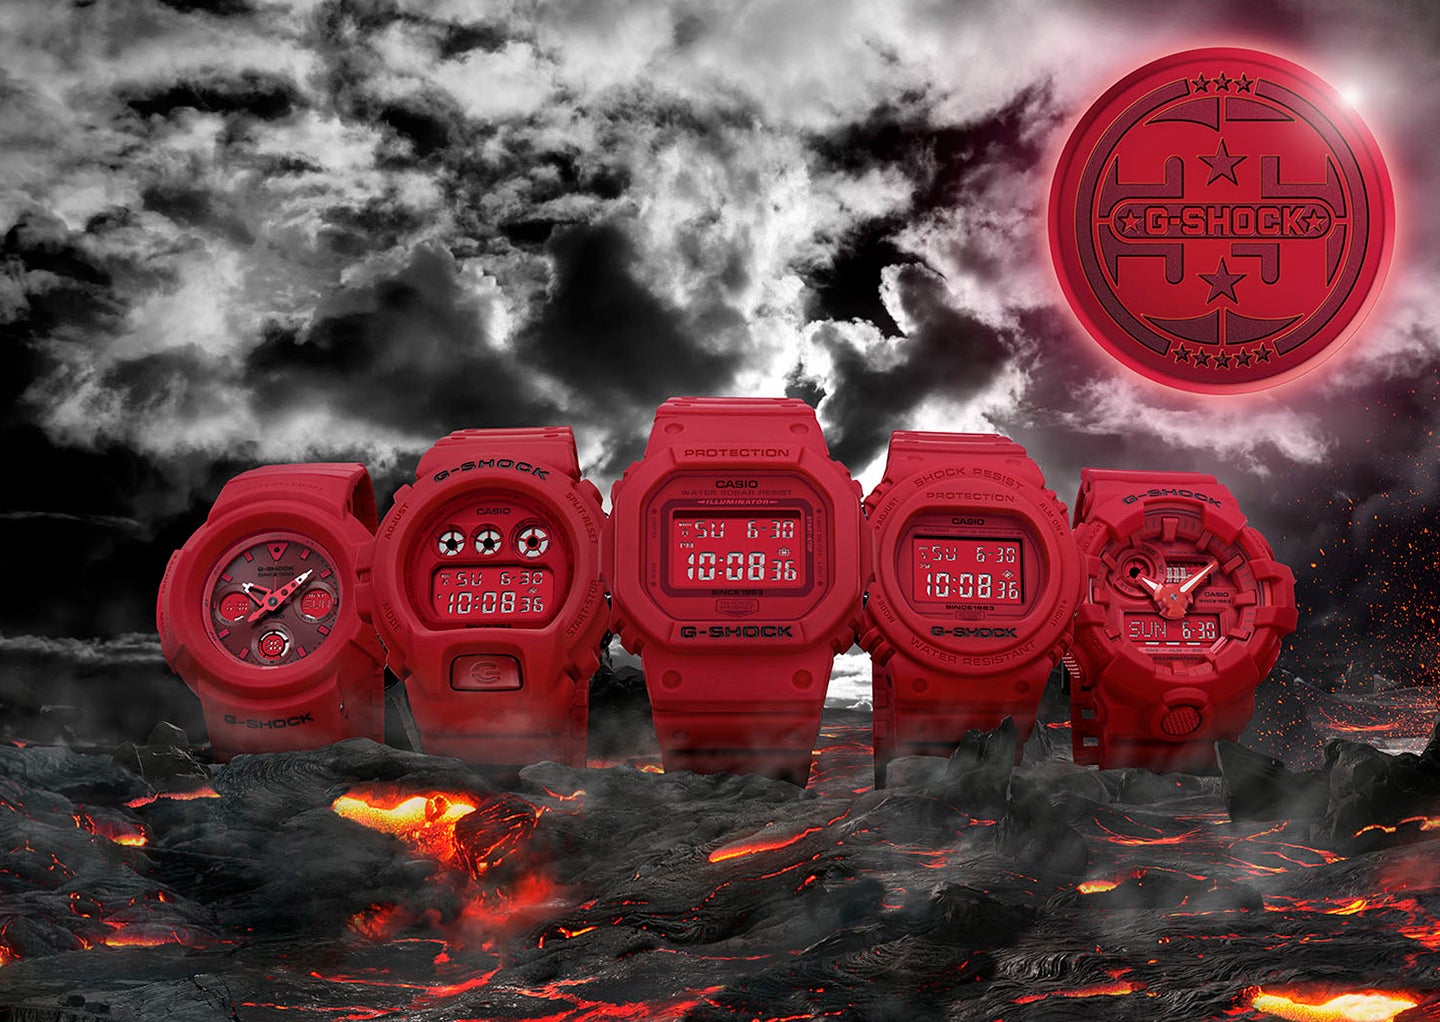 G-SHOCK」35周年、記念モデル第3弾は赤でまとめた「RED OUT」 | マイ